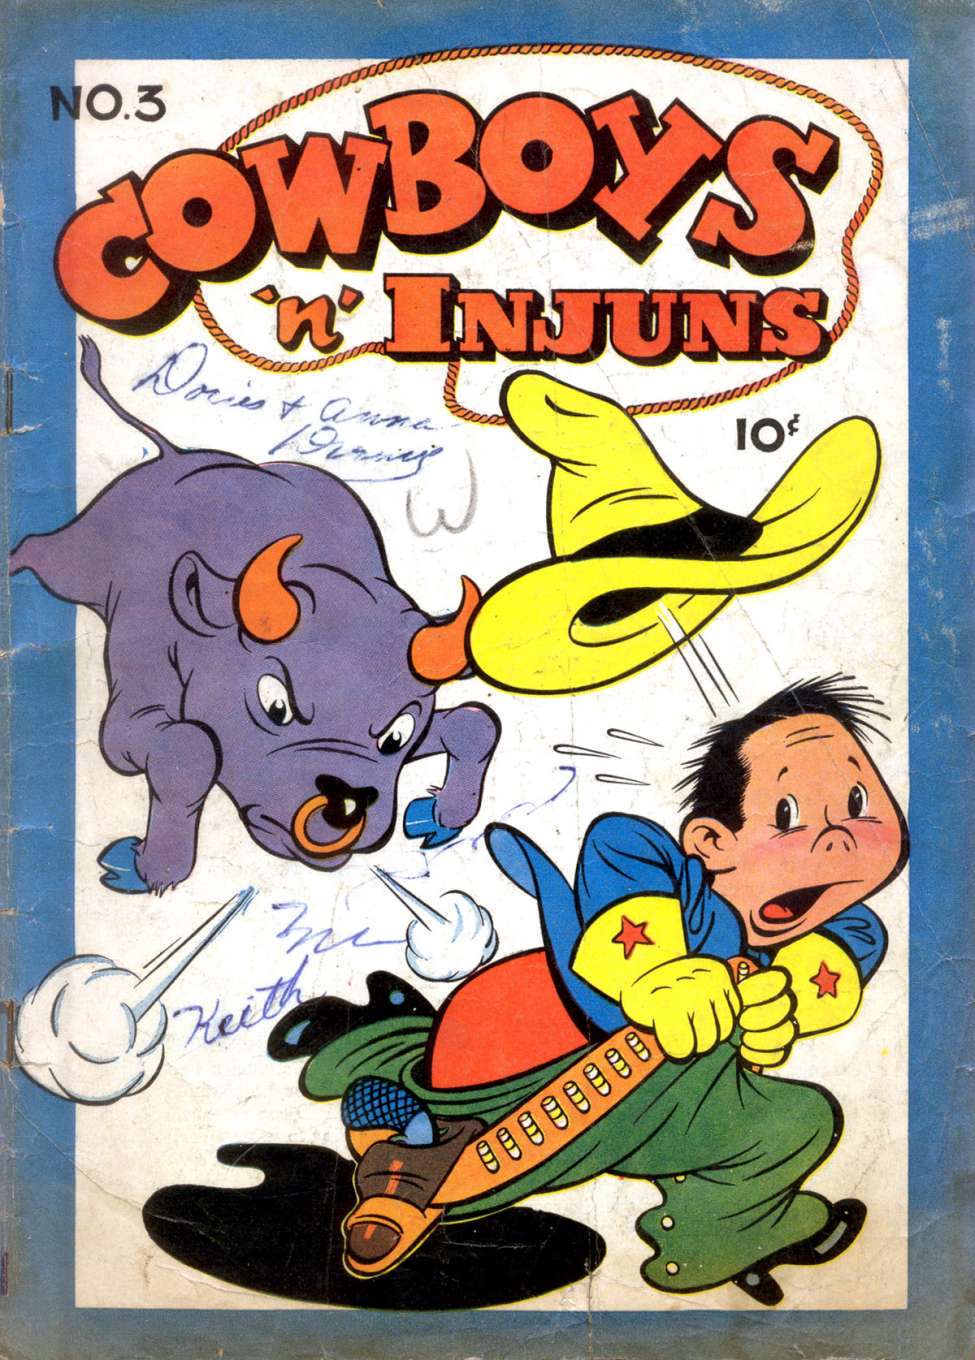 Book Cover For Cowboys 'N' Injuns 3 - Version 1